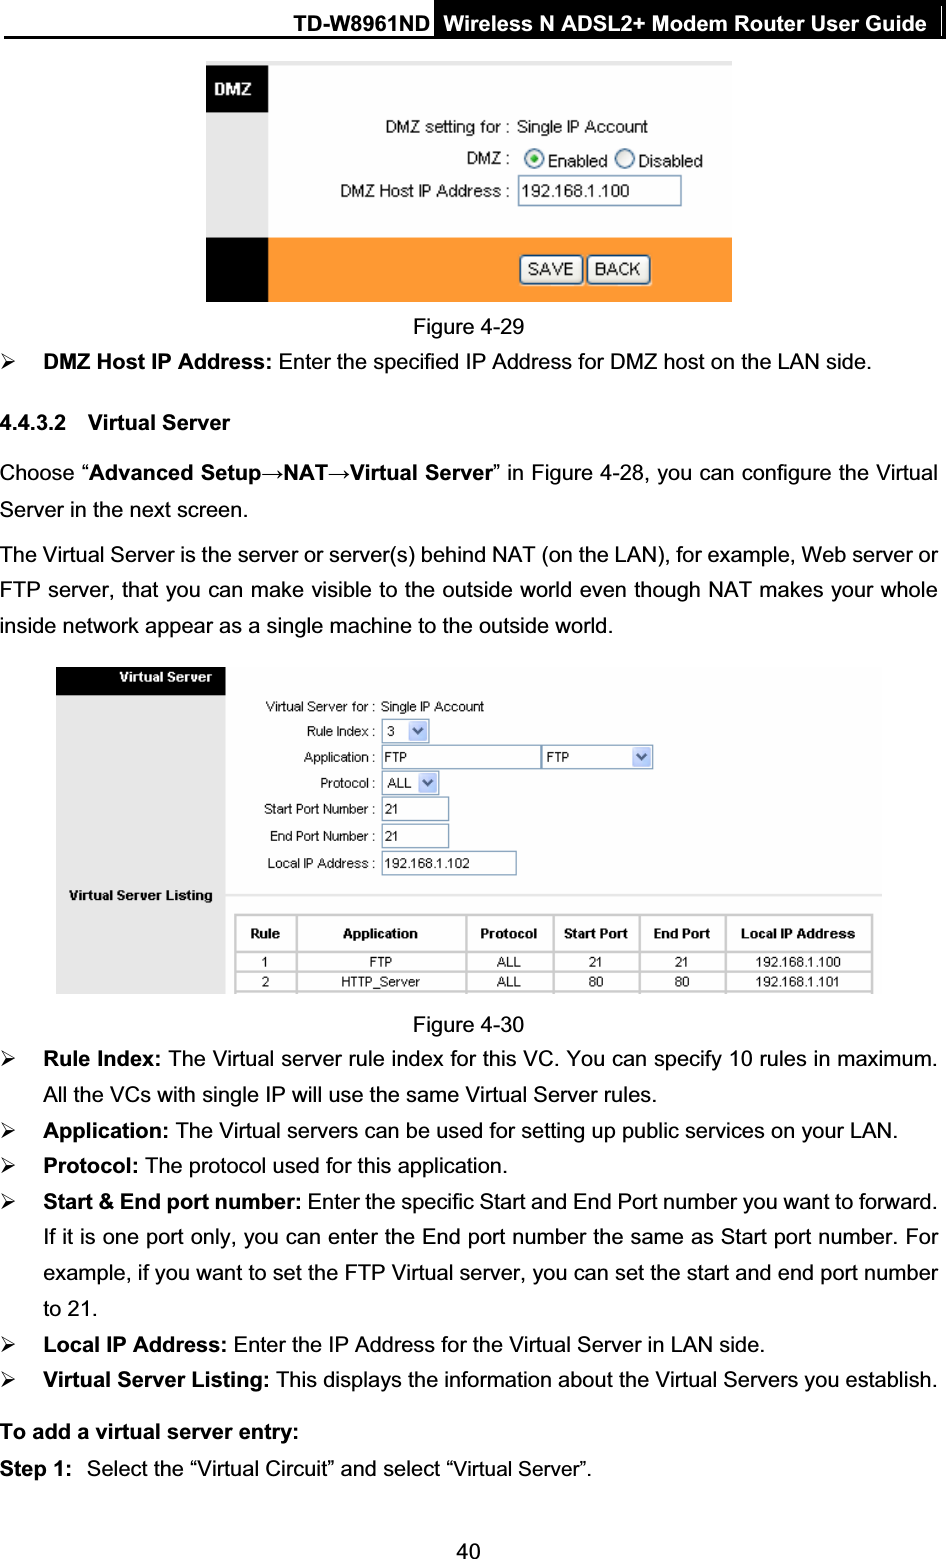 TD-W8961ND Wireless N ADSL2+ Modem Router User Guide40Figure 4-29 ¾DMZ Host IP Address: Enter the specified IP Address for DMZ host on the LAN side. 4.4.3.2 Virtual Server Choose “Advanced SetupĺNATĺVirtual Server” in Figure 4-28, you can configure the Virtual Server in the next screen.   The Virtual Server is the server or server(s) behind NAT (on the LAN), for example, Web server or FTP server, that you can make visible to the outside world even though NAT makes your whole inside network appear as a single machine to the outside world. Figure 4-30 ¾Rule Index: The Virtual server rule index for this VC. You can specify 10 rules in maximum. All the VCs with single IP will use the same Virtual Server rules. ¾Application: The Virtual servers can be used for setting up public services on your LAN. ¾Protocol: The protocol used for this application.¾Start &amp; End port number: Enter the specific Start and End Port number you want to forward. If it is one port only, you can enter the End port number the same as Start port number. For example, if you want to set the FTP Virtual server, you can set the start and end port number to 21. ¾Local IP Address: Enter the IP Address for the Virtual Server in LAN side. ¾Virtual Server Listing: This displays the information about the Virtual Servers you establish. To add a virtual server entry:   Step 1:  Select the “Virtual Circuit” and select “Virtual Server”.